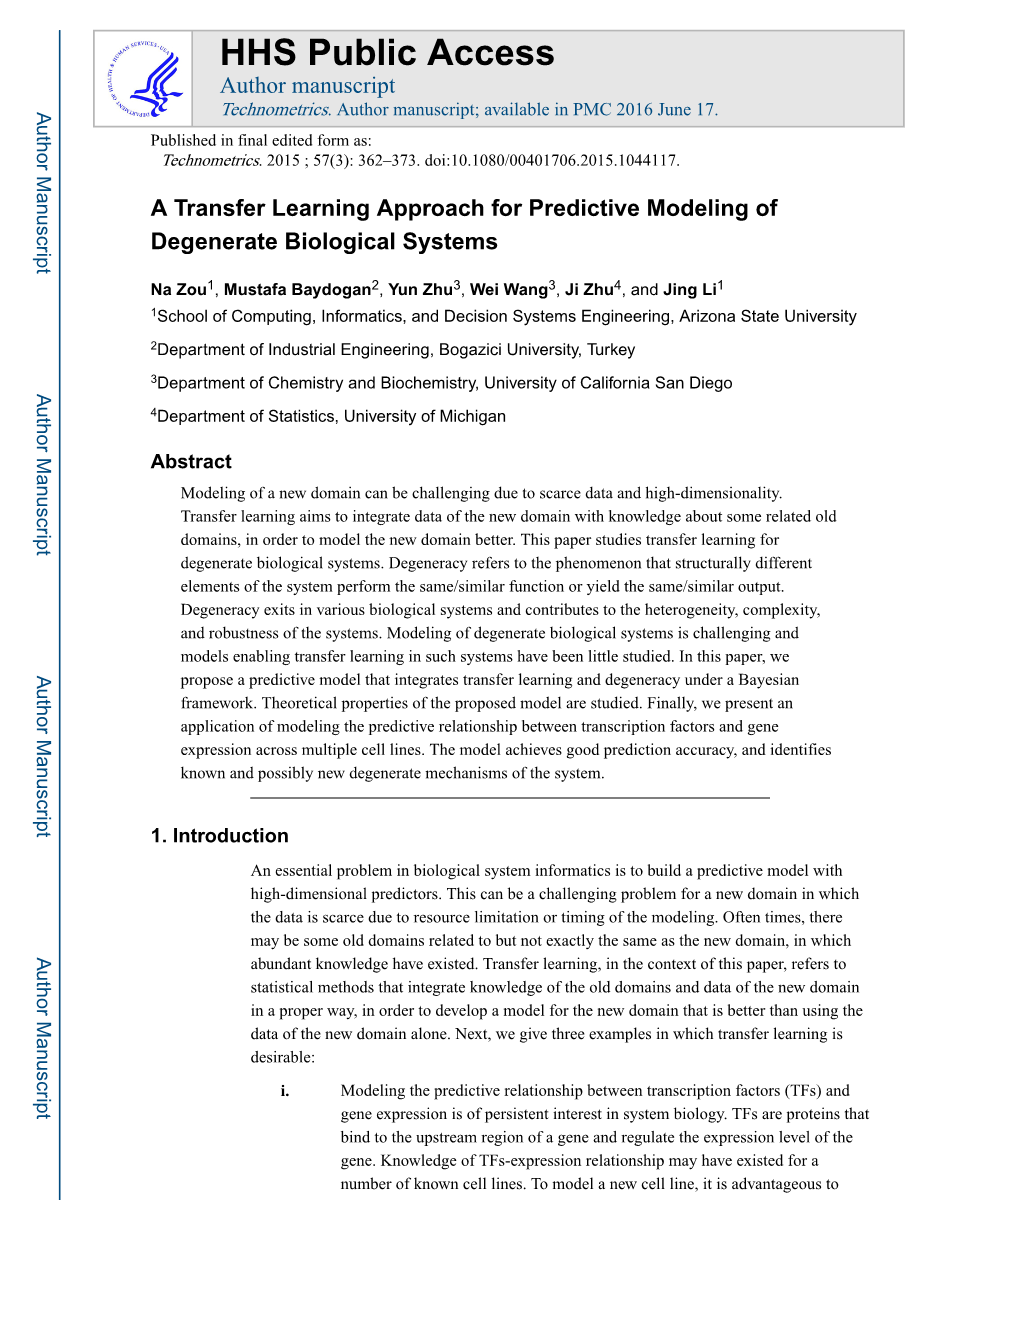 A Transfer Learning Approach for Predictive Modeling of Degenerate Biological Systems